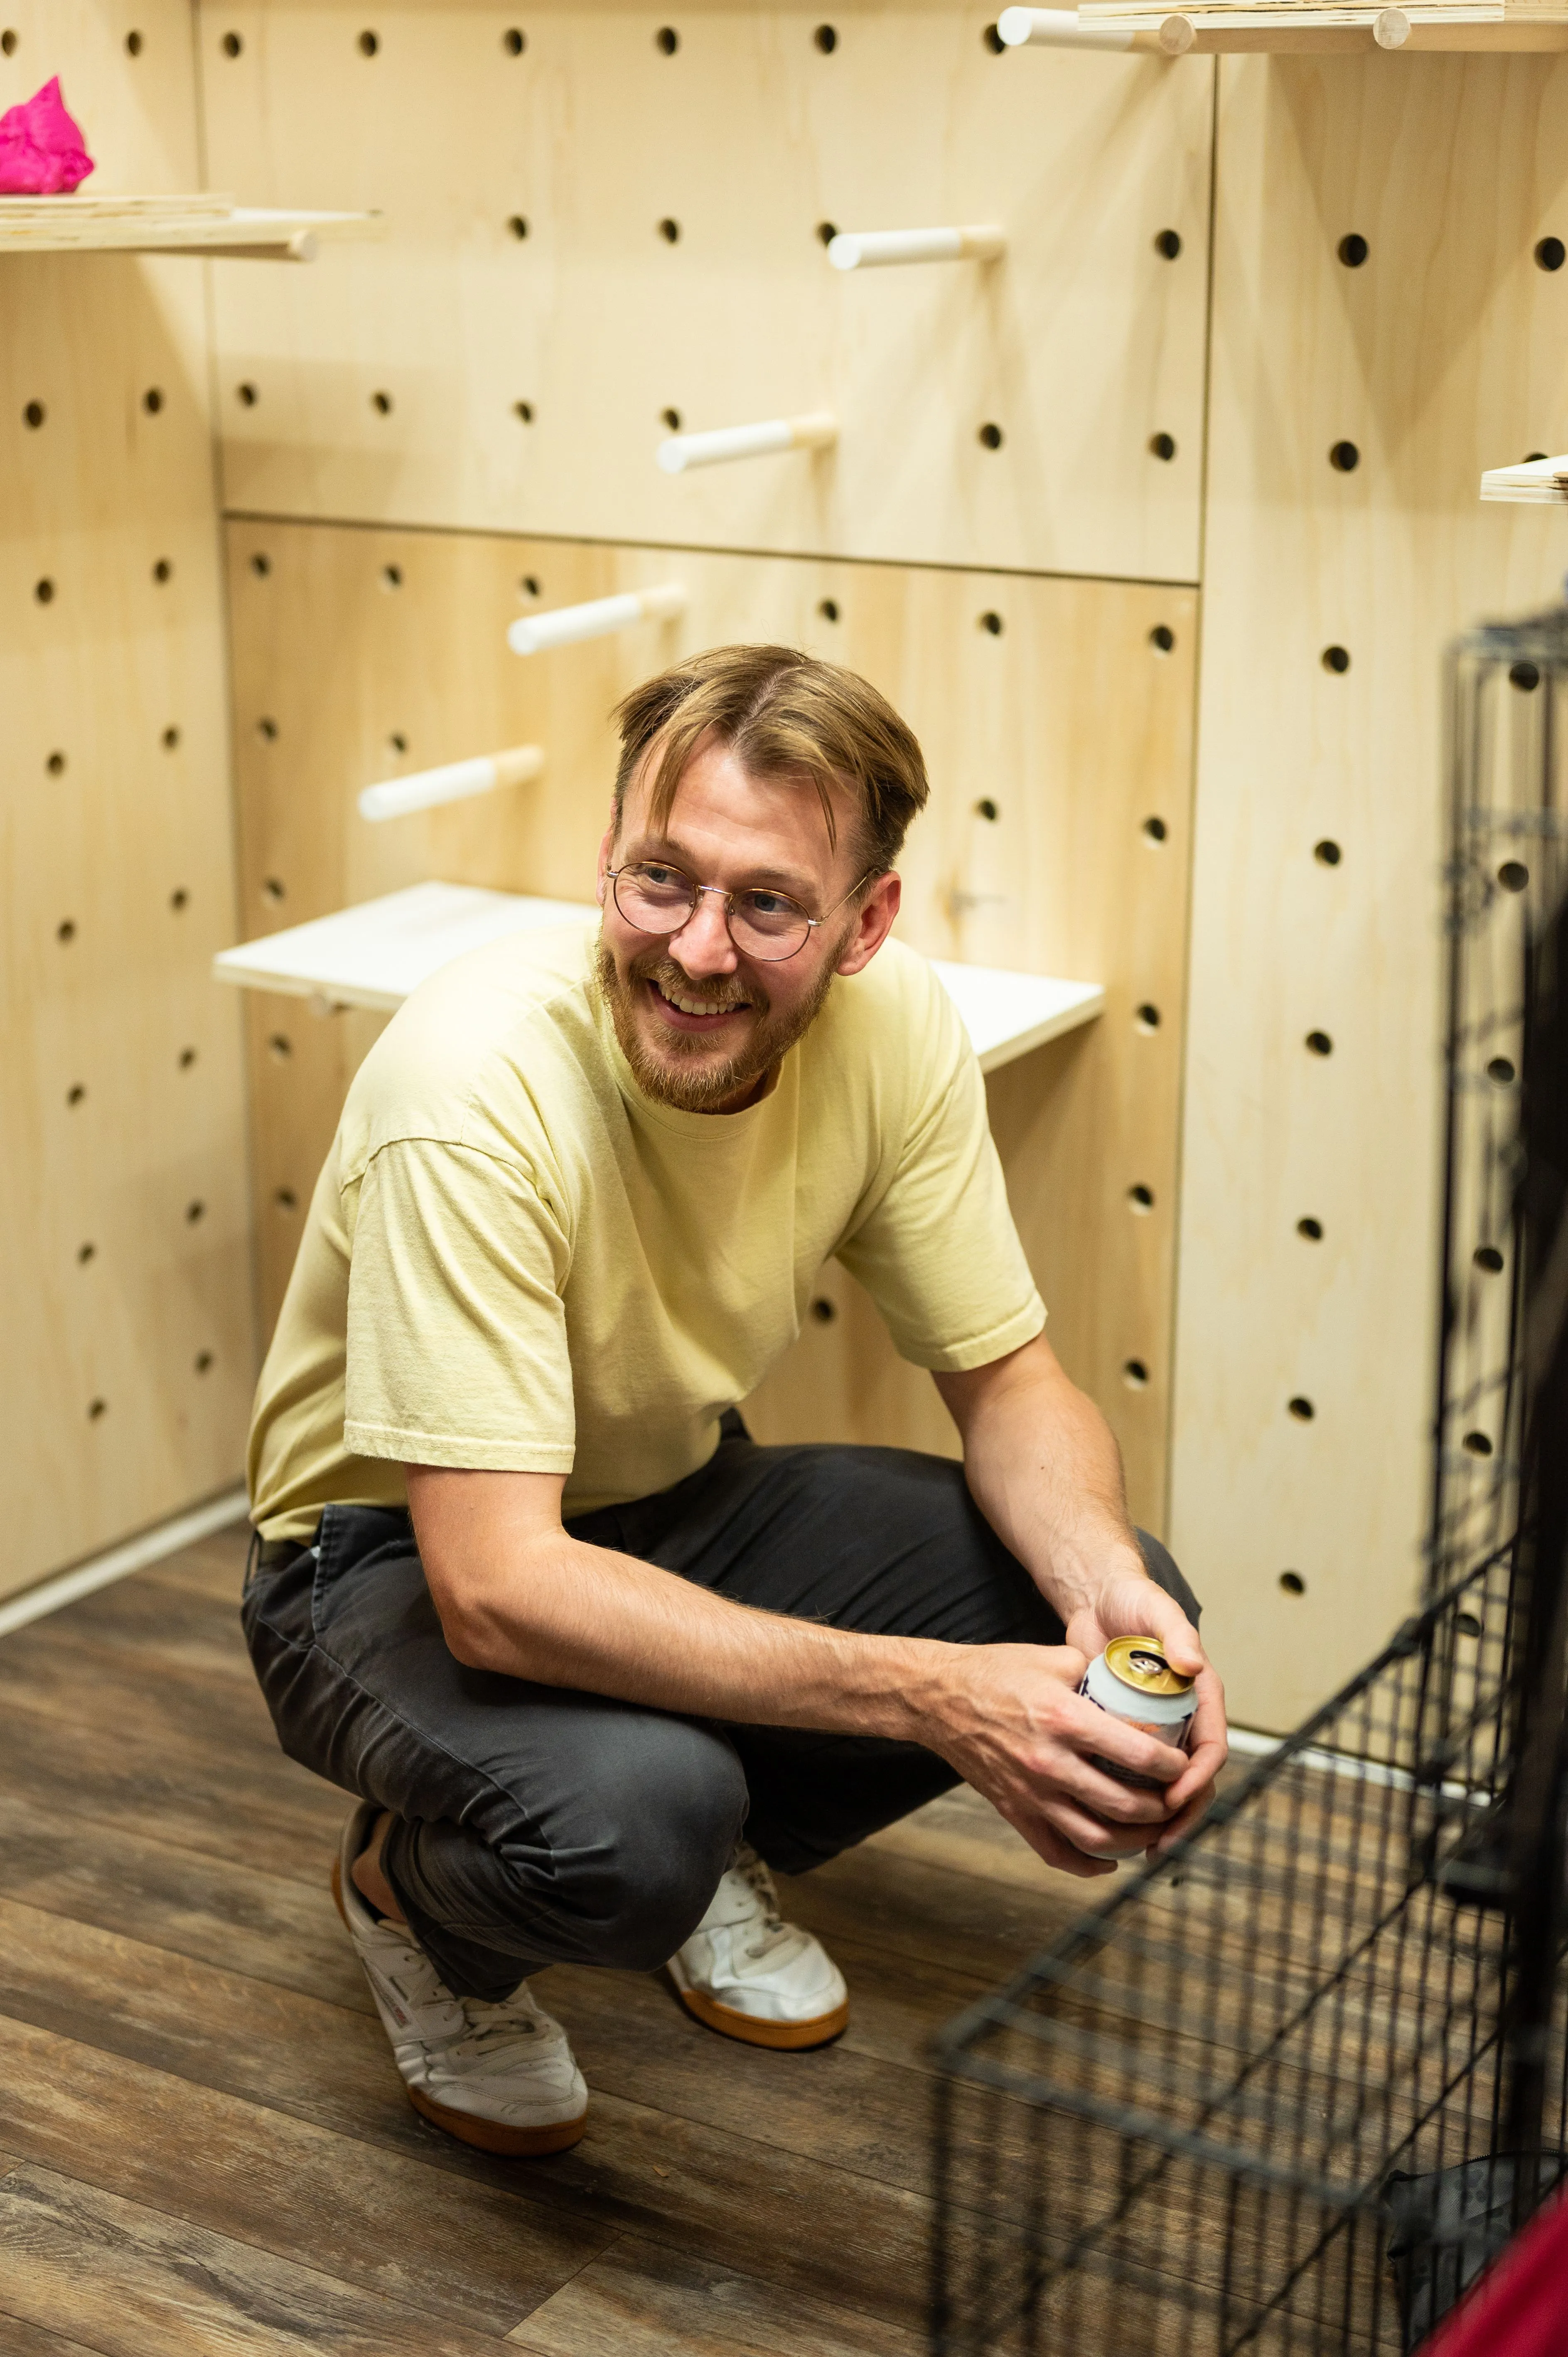 Man crouching and smiling inside a small wooden enclosure with pegboard walls.